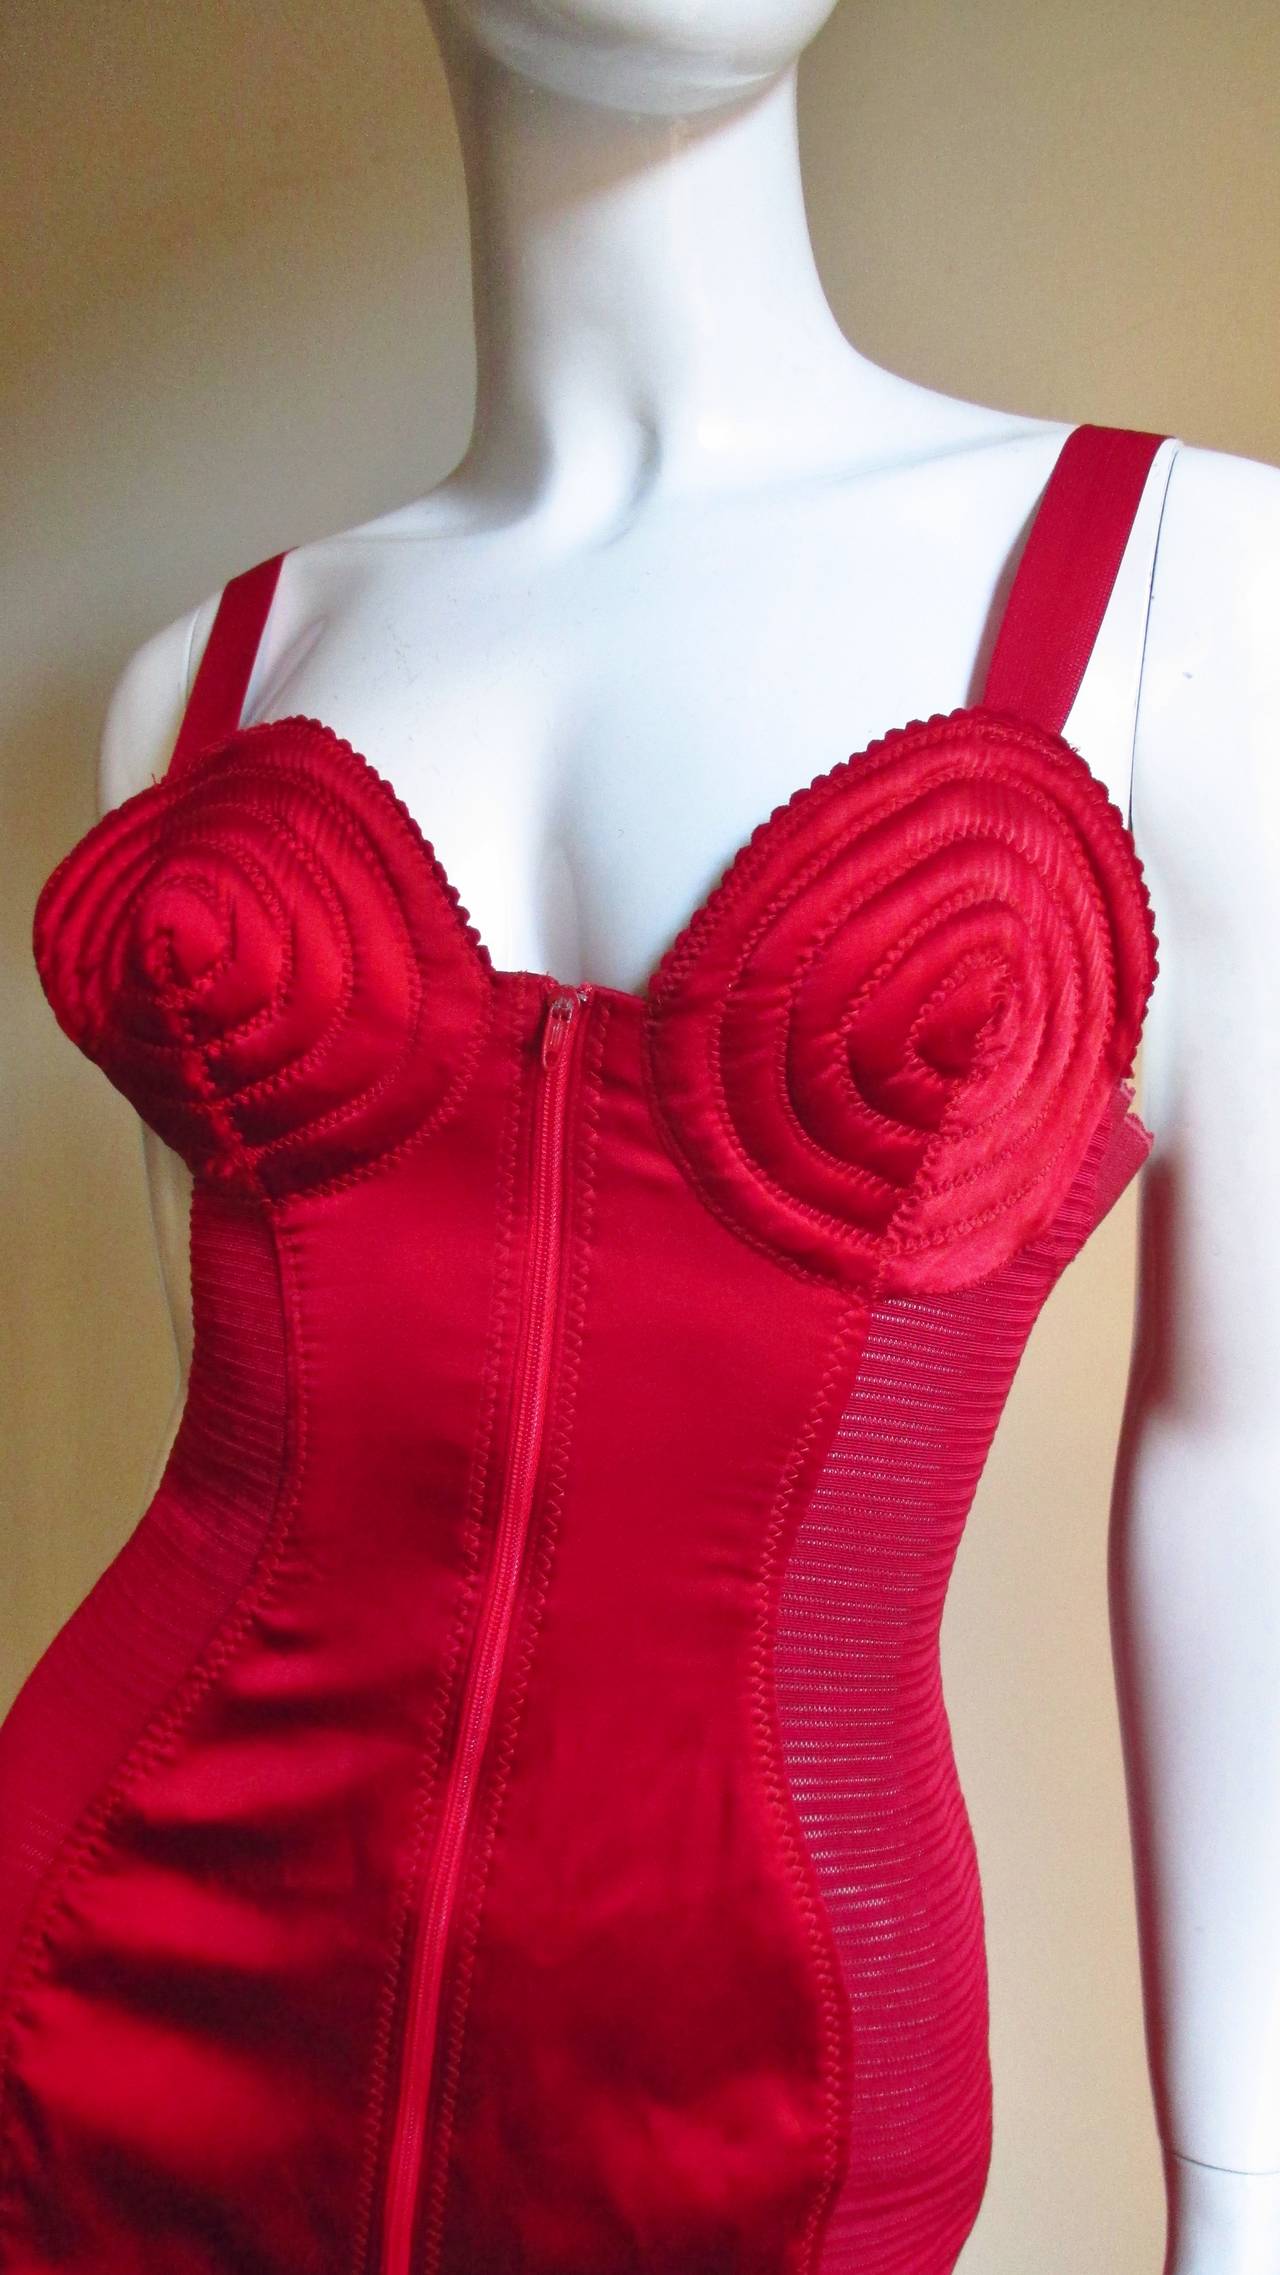 Fabulous bright cherry red dress from Jean Paul Gaultier from the Madonna 'like a virgin' days when underwear moved to outer wear. It's corset style with multi top stitched bra cups (appropriate for a smaller bust due to their depth) with wide satin